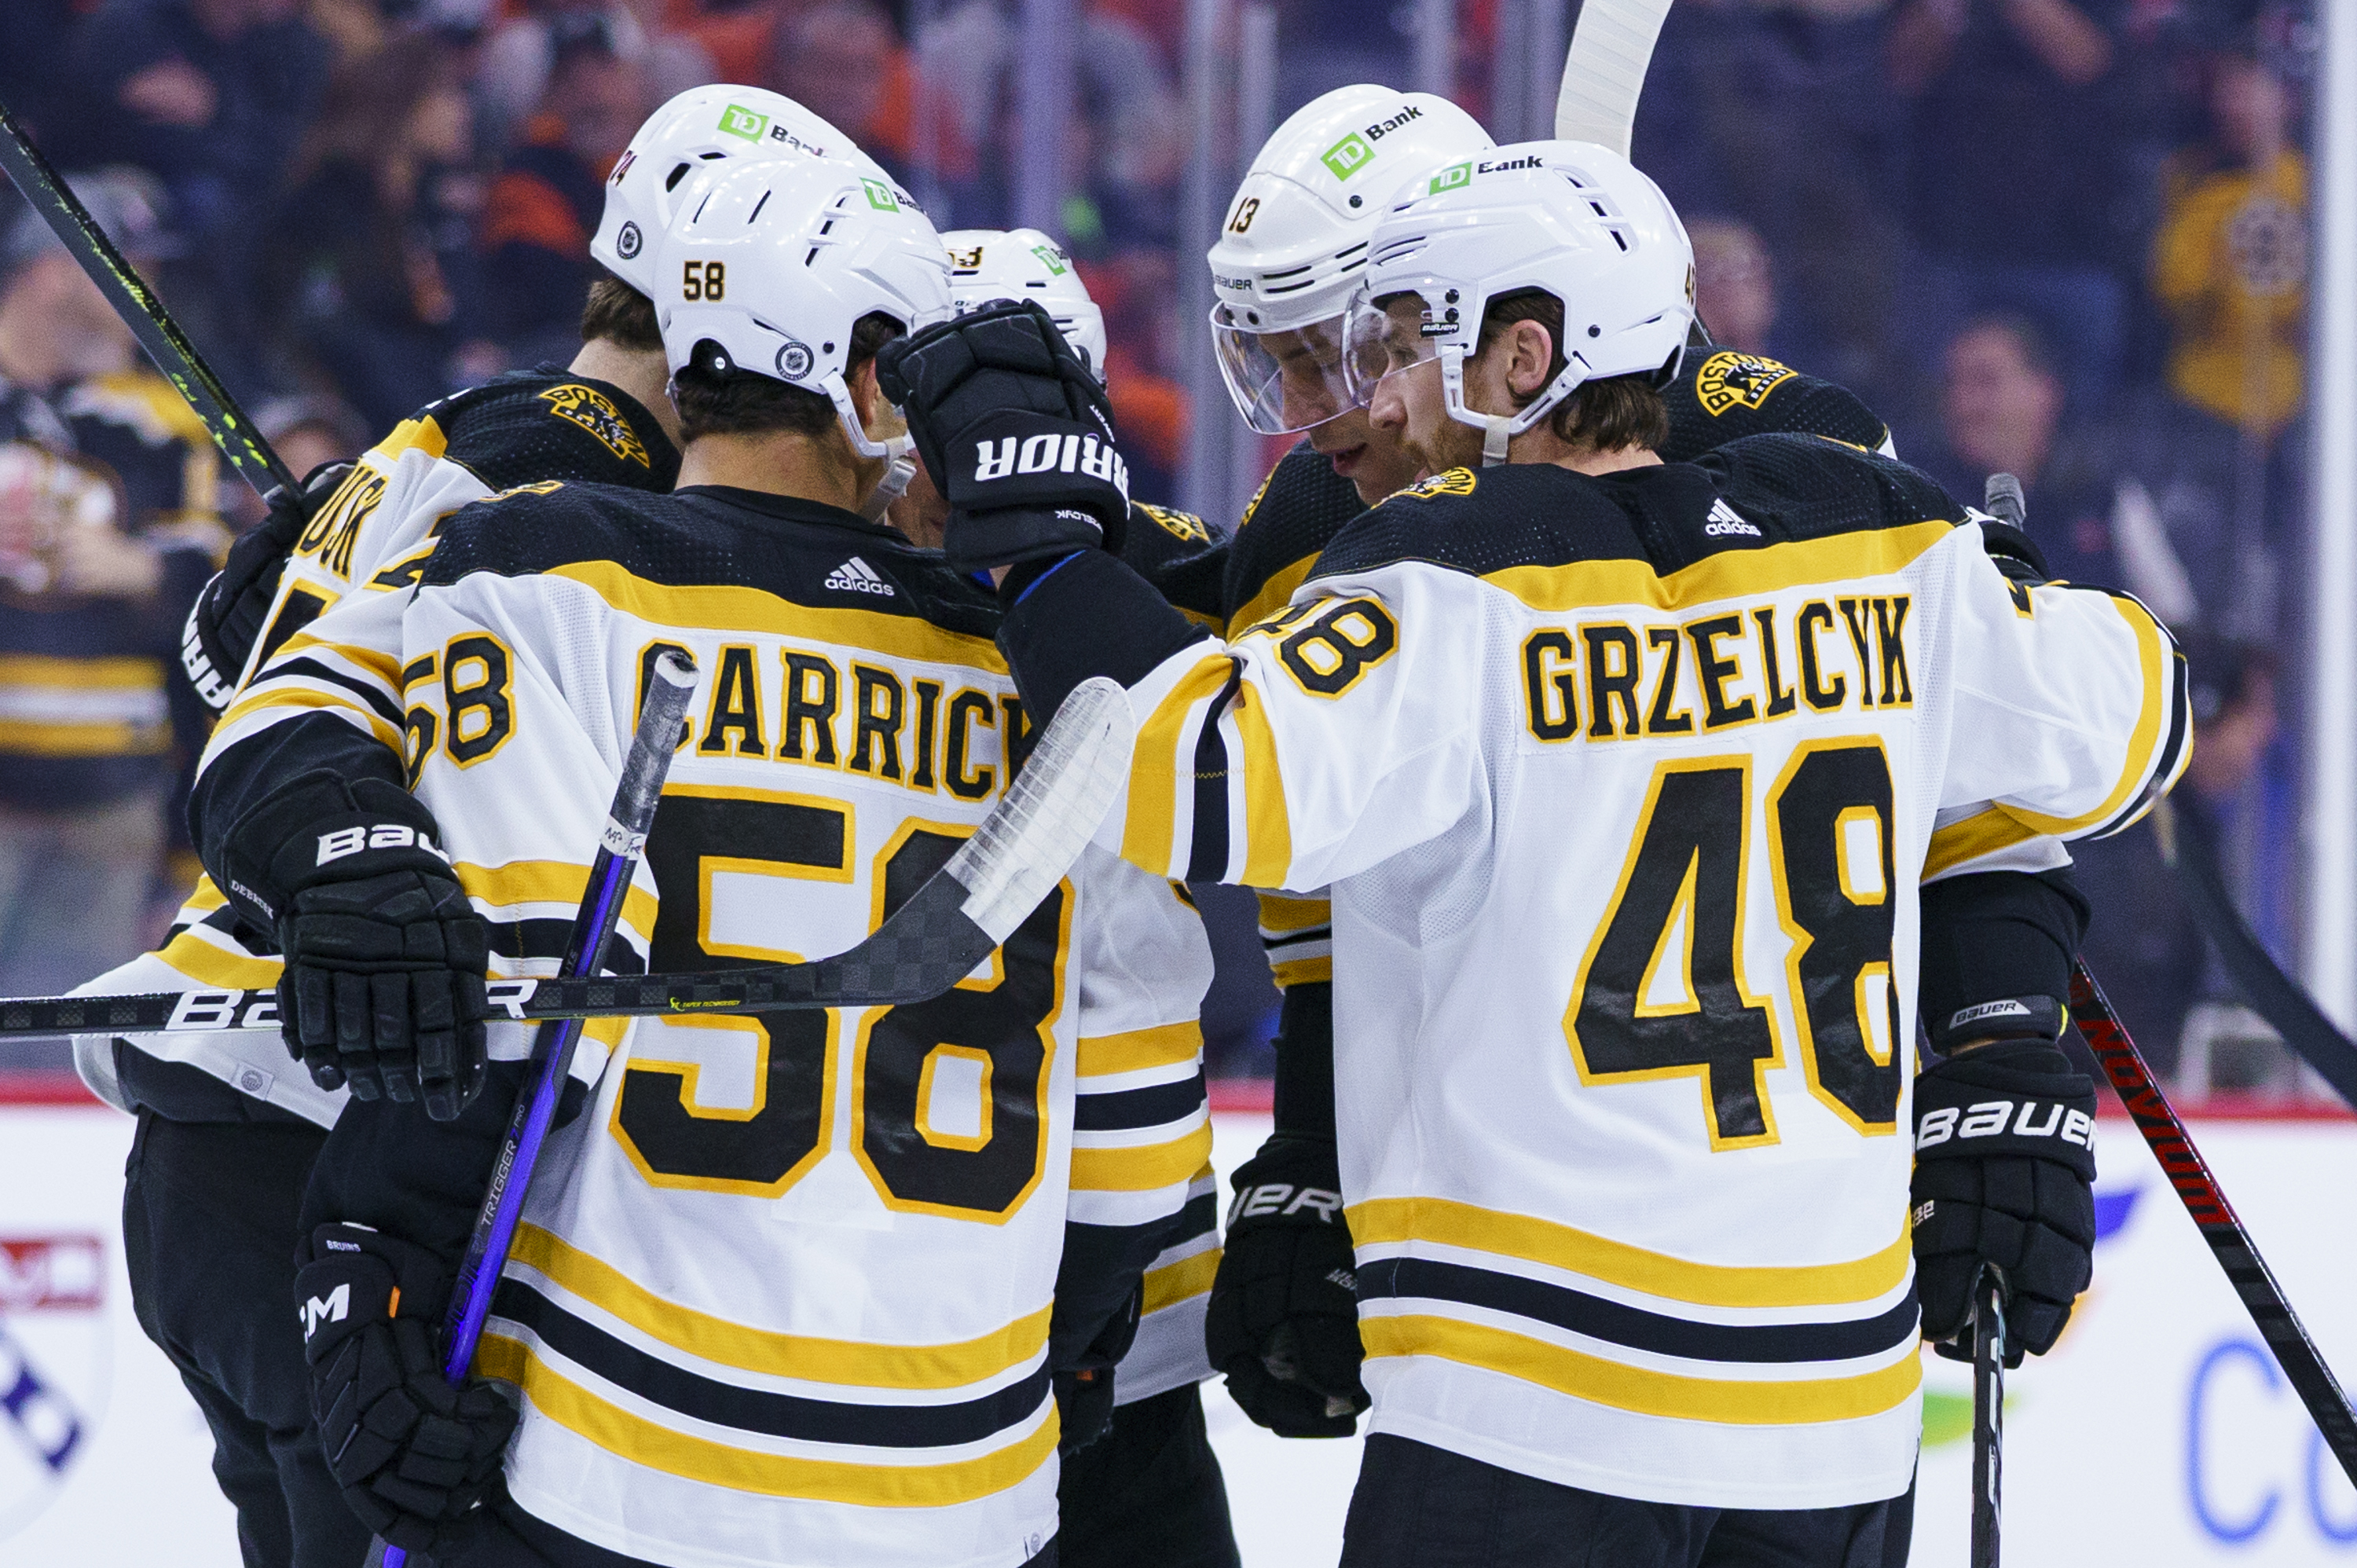 The Bruins Bergeron Pastrnak And Krejci Thanks For The Memories